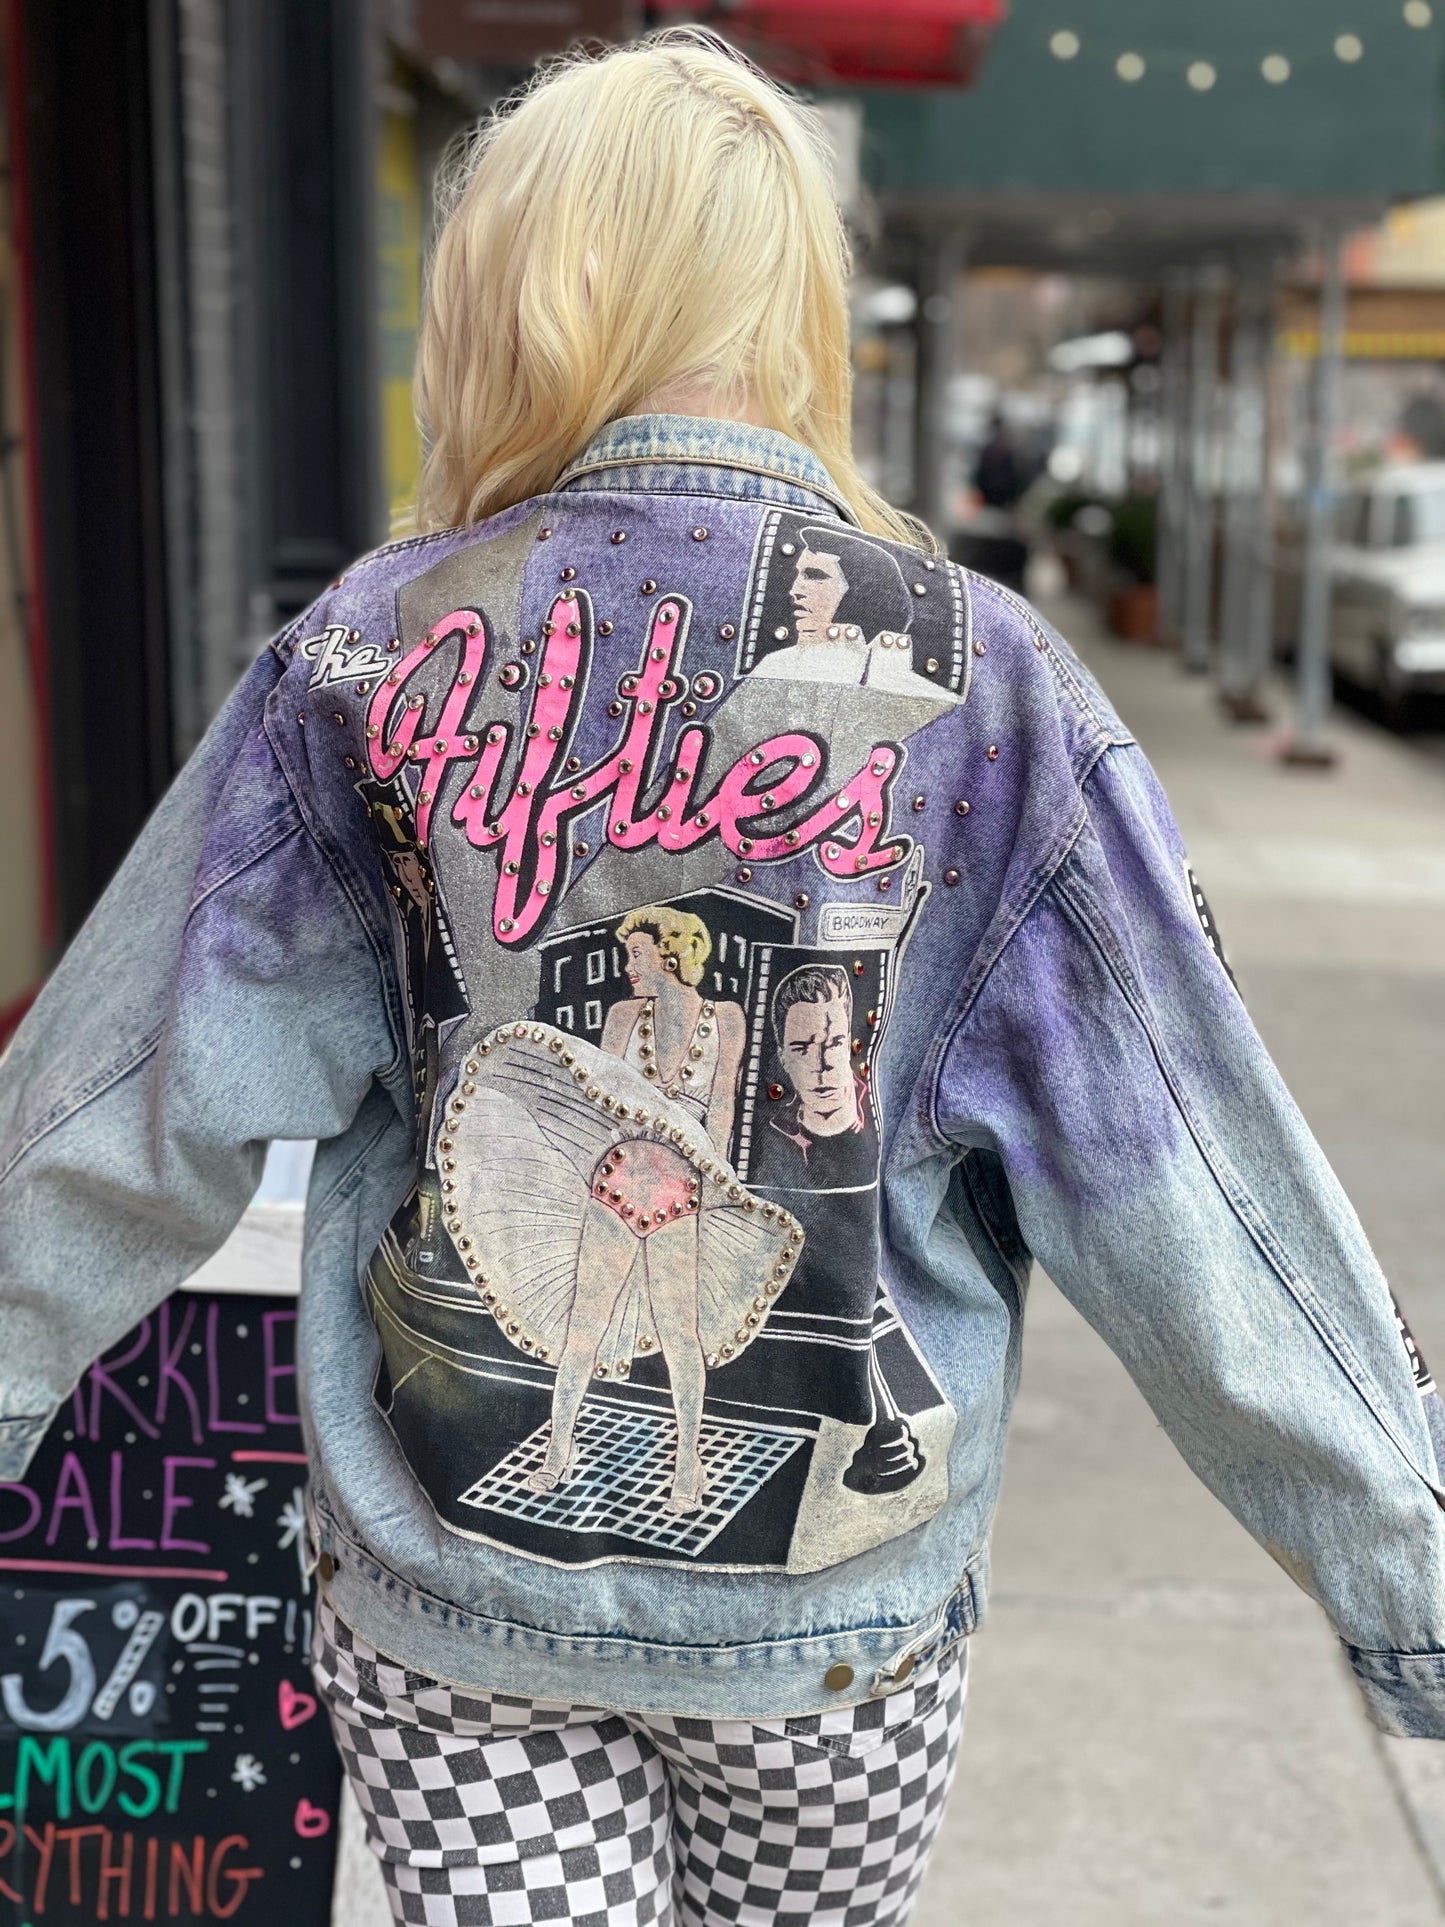 Found this amazing hand painted denim jacket on sale for 80$ : r